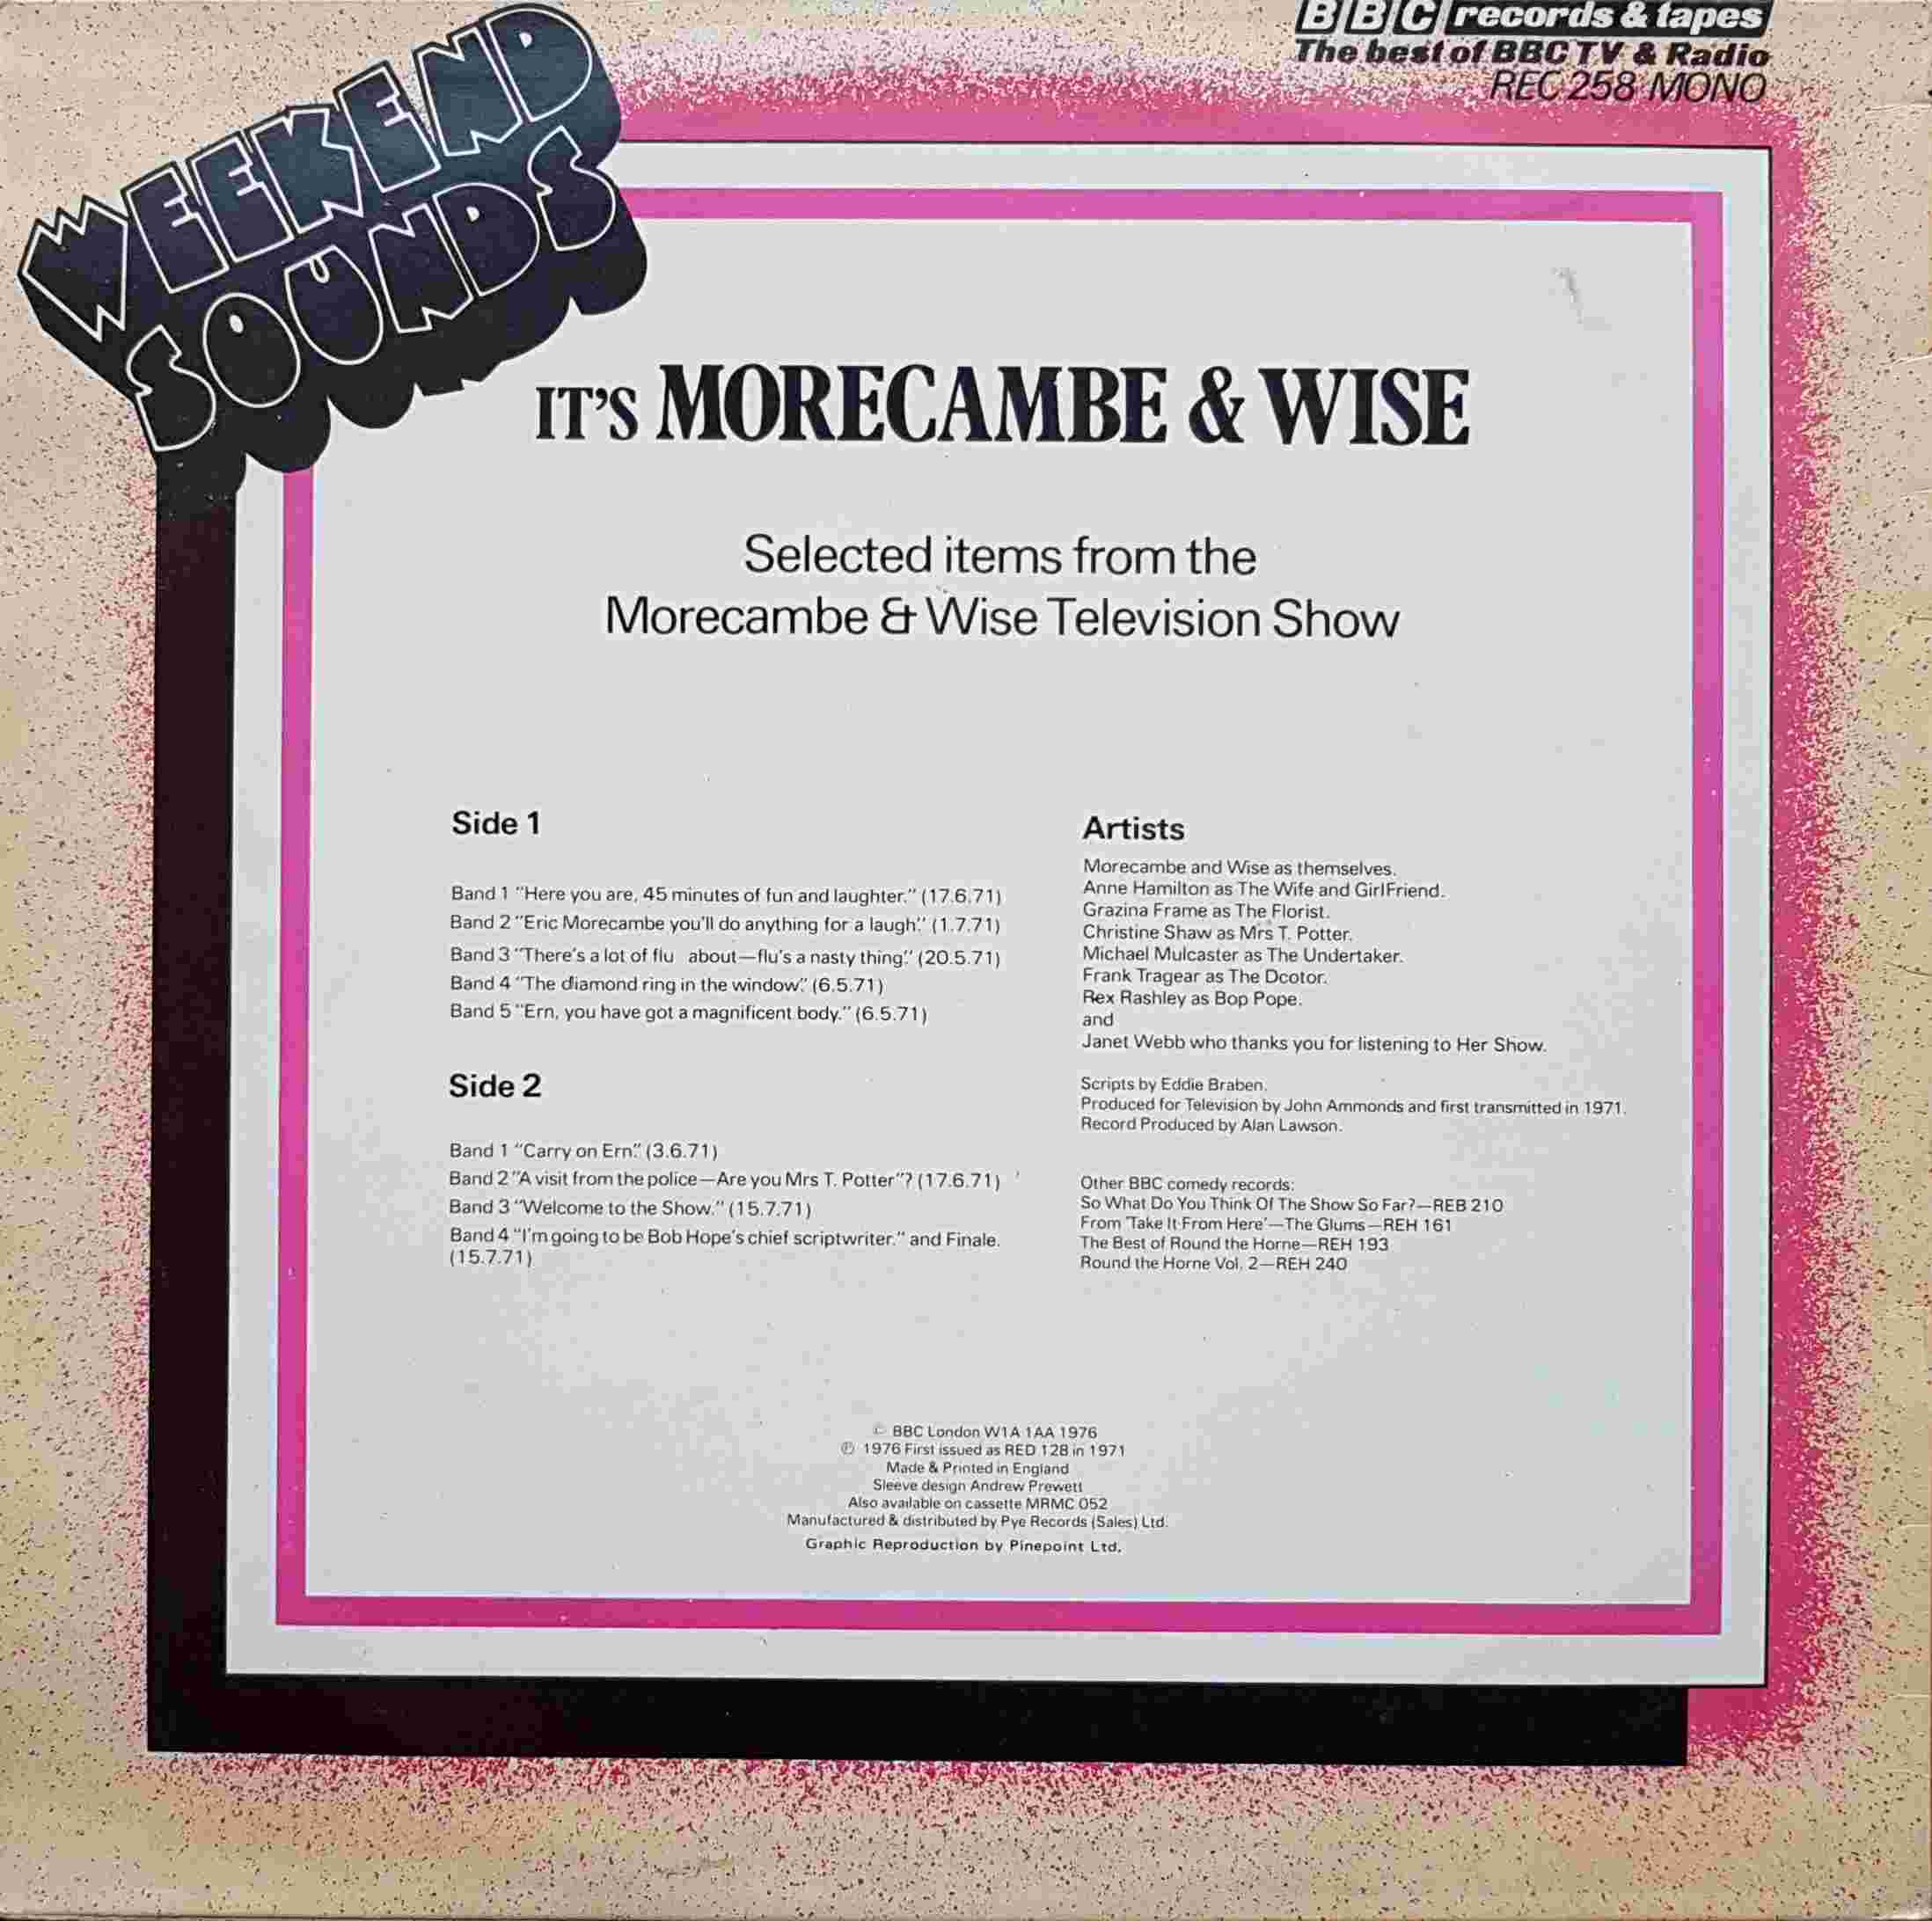 Picture of REC 258 Its Morecambe & Wise by artist Morecambe / Wise from the BBC records and Tapes library